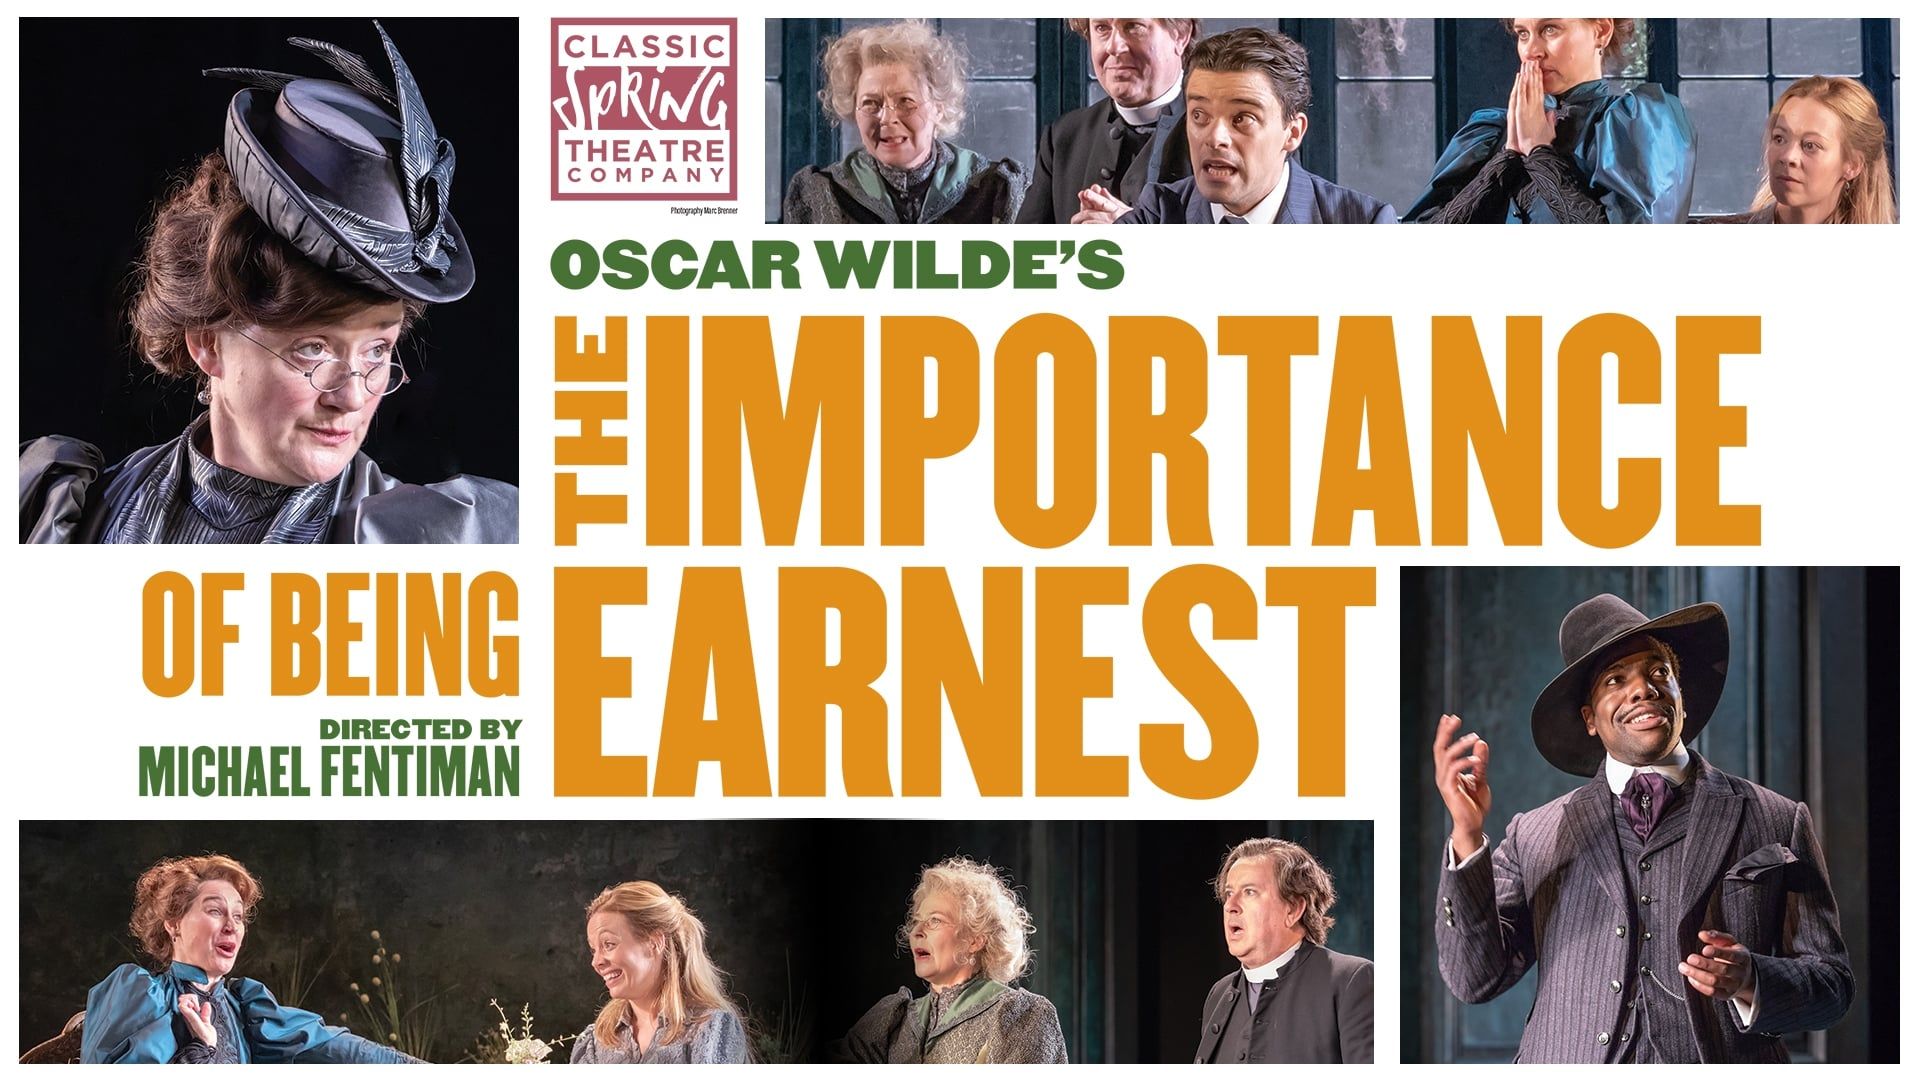 The Importance of Being Earnest background